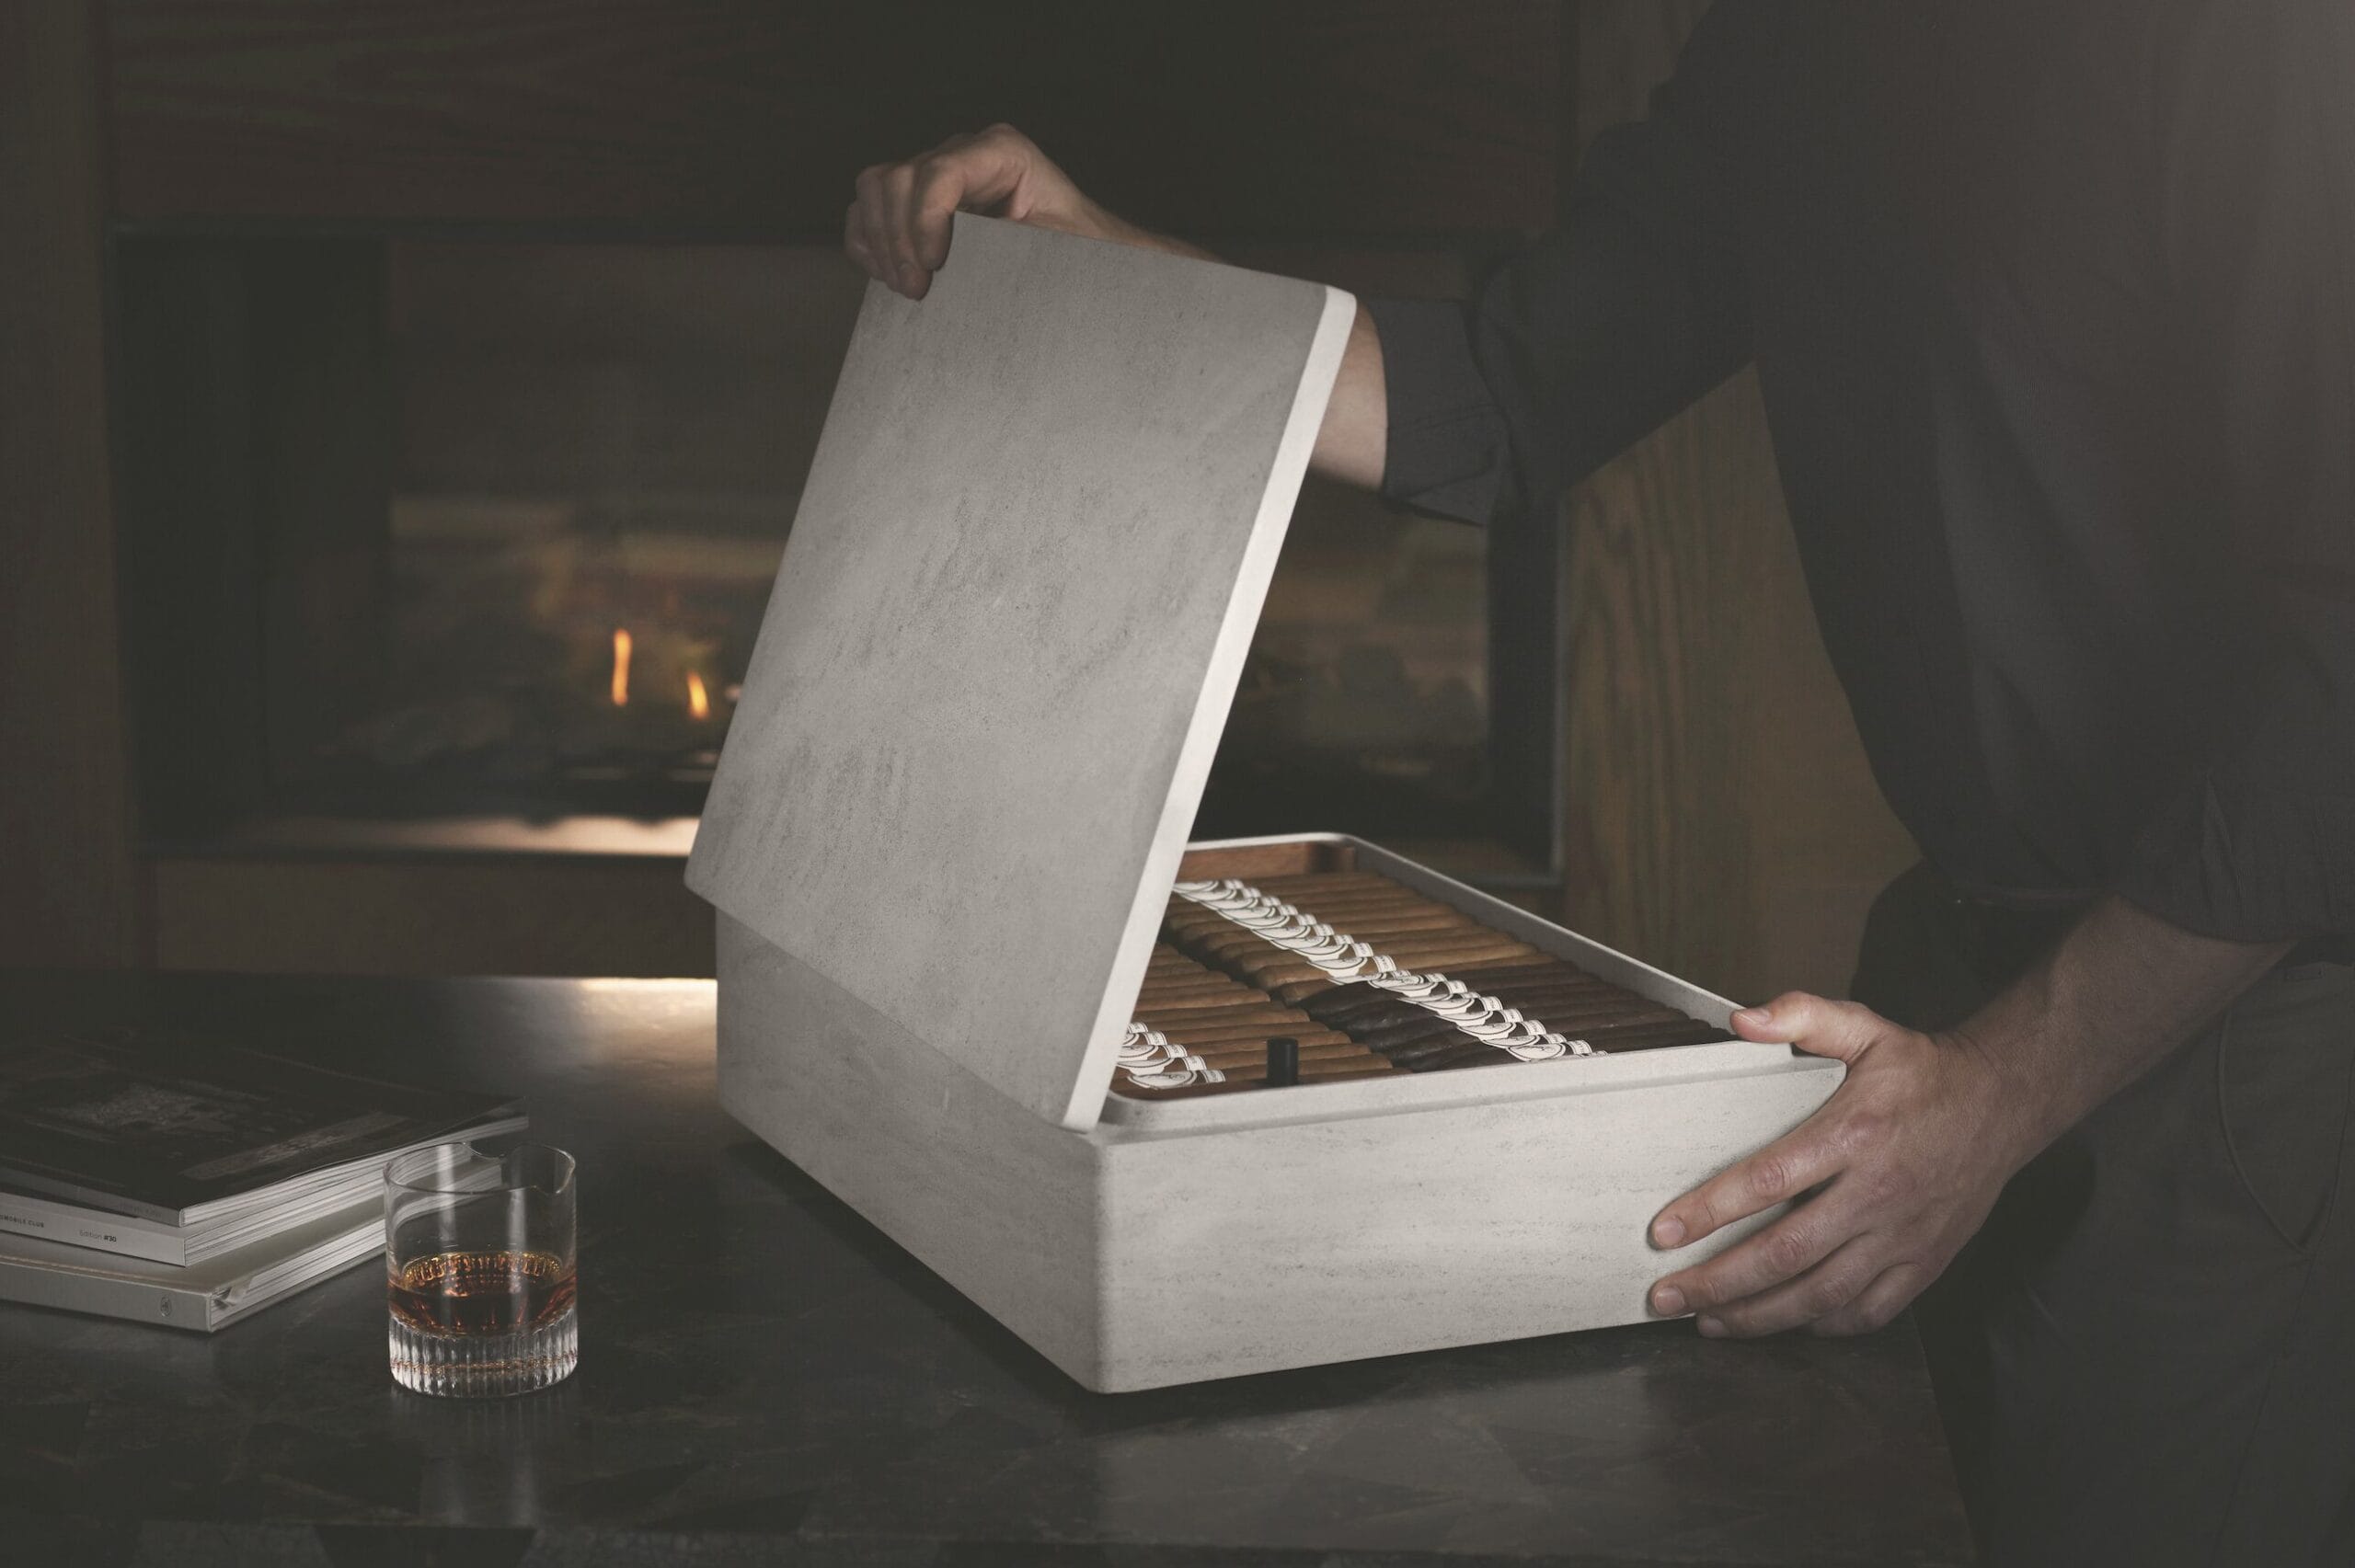 DAVIDOFF CIGARS CONTINUES TO SET A HIGH STANDARD FOR UNPARALLELED INNOVATION AND PRESENTS ITS HUMIDOR MADE ENTIRELY OF STONE – THE DAVIDOFF MONOLITH HUMIDOR